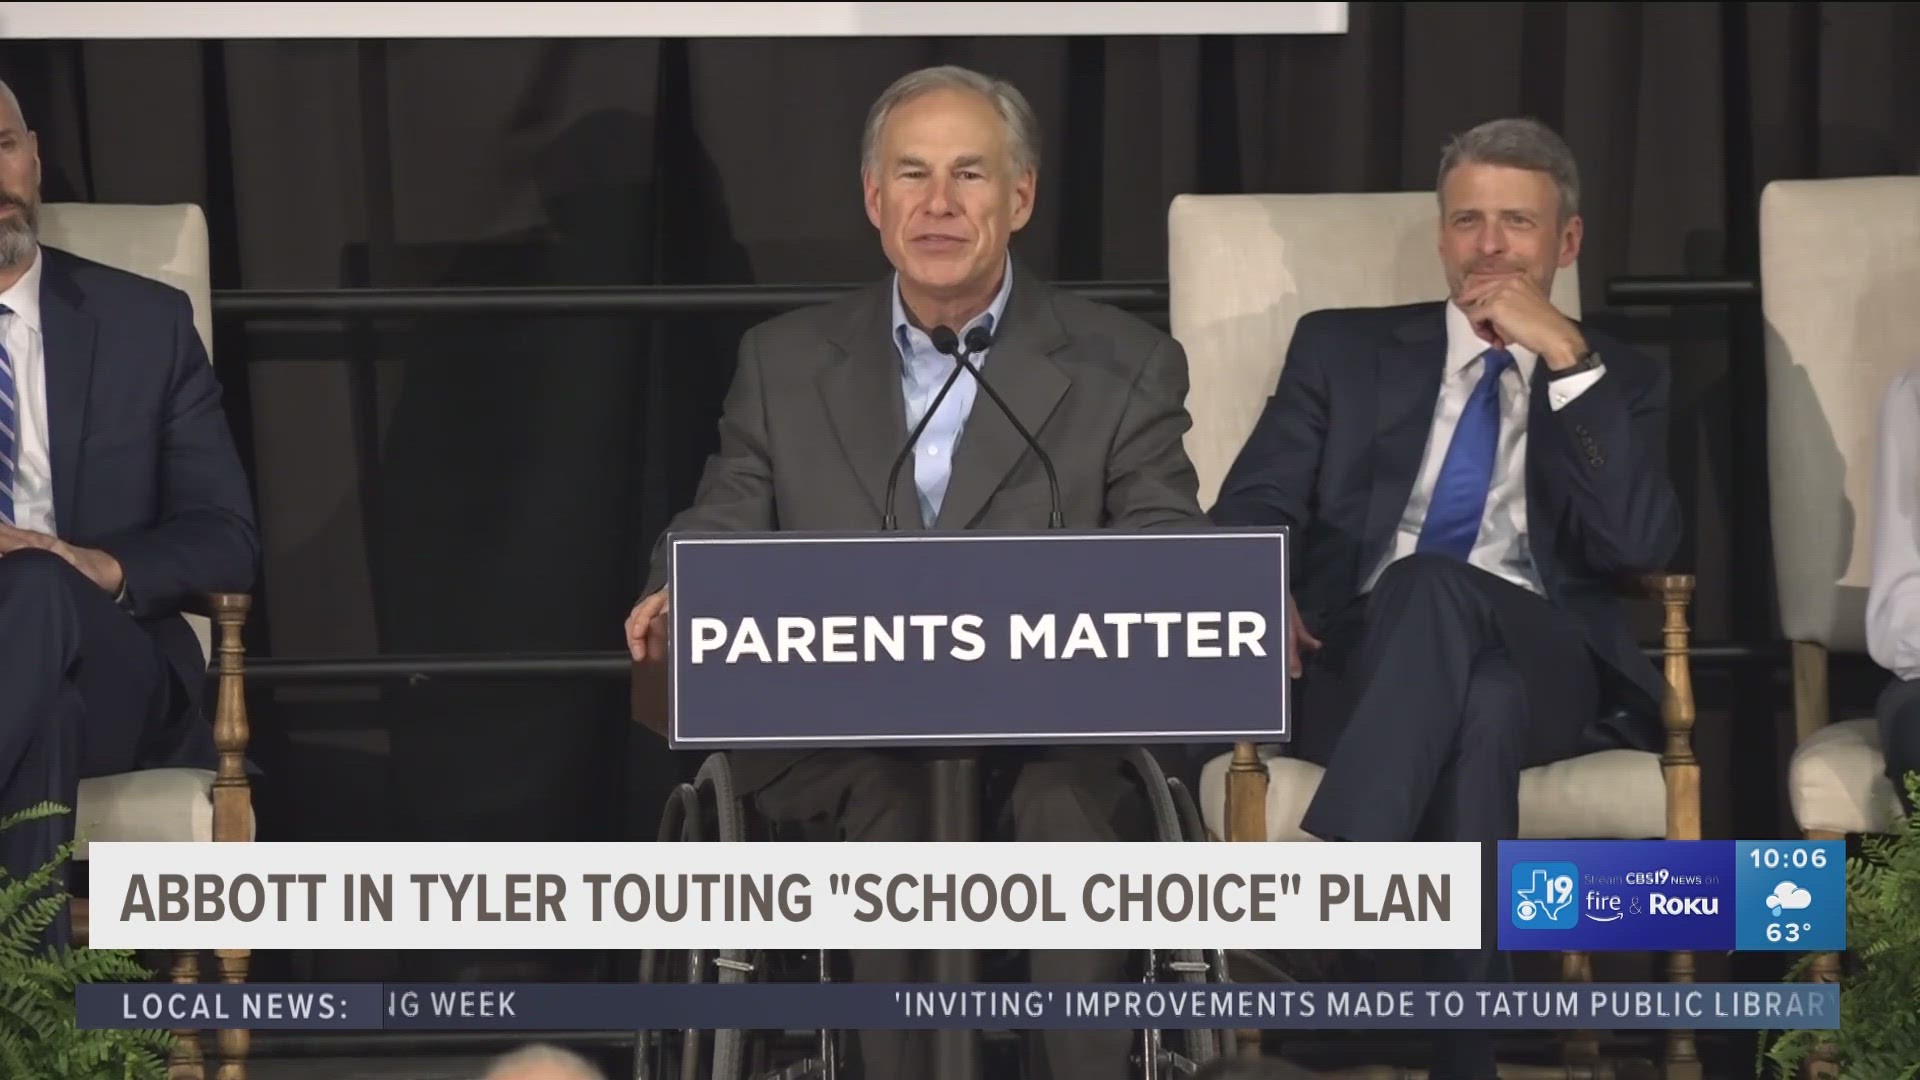 Abbott was touting his plan to change school funding. Talking up the benefits of giving parents the opportunity to choose where their children attend school.